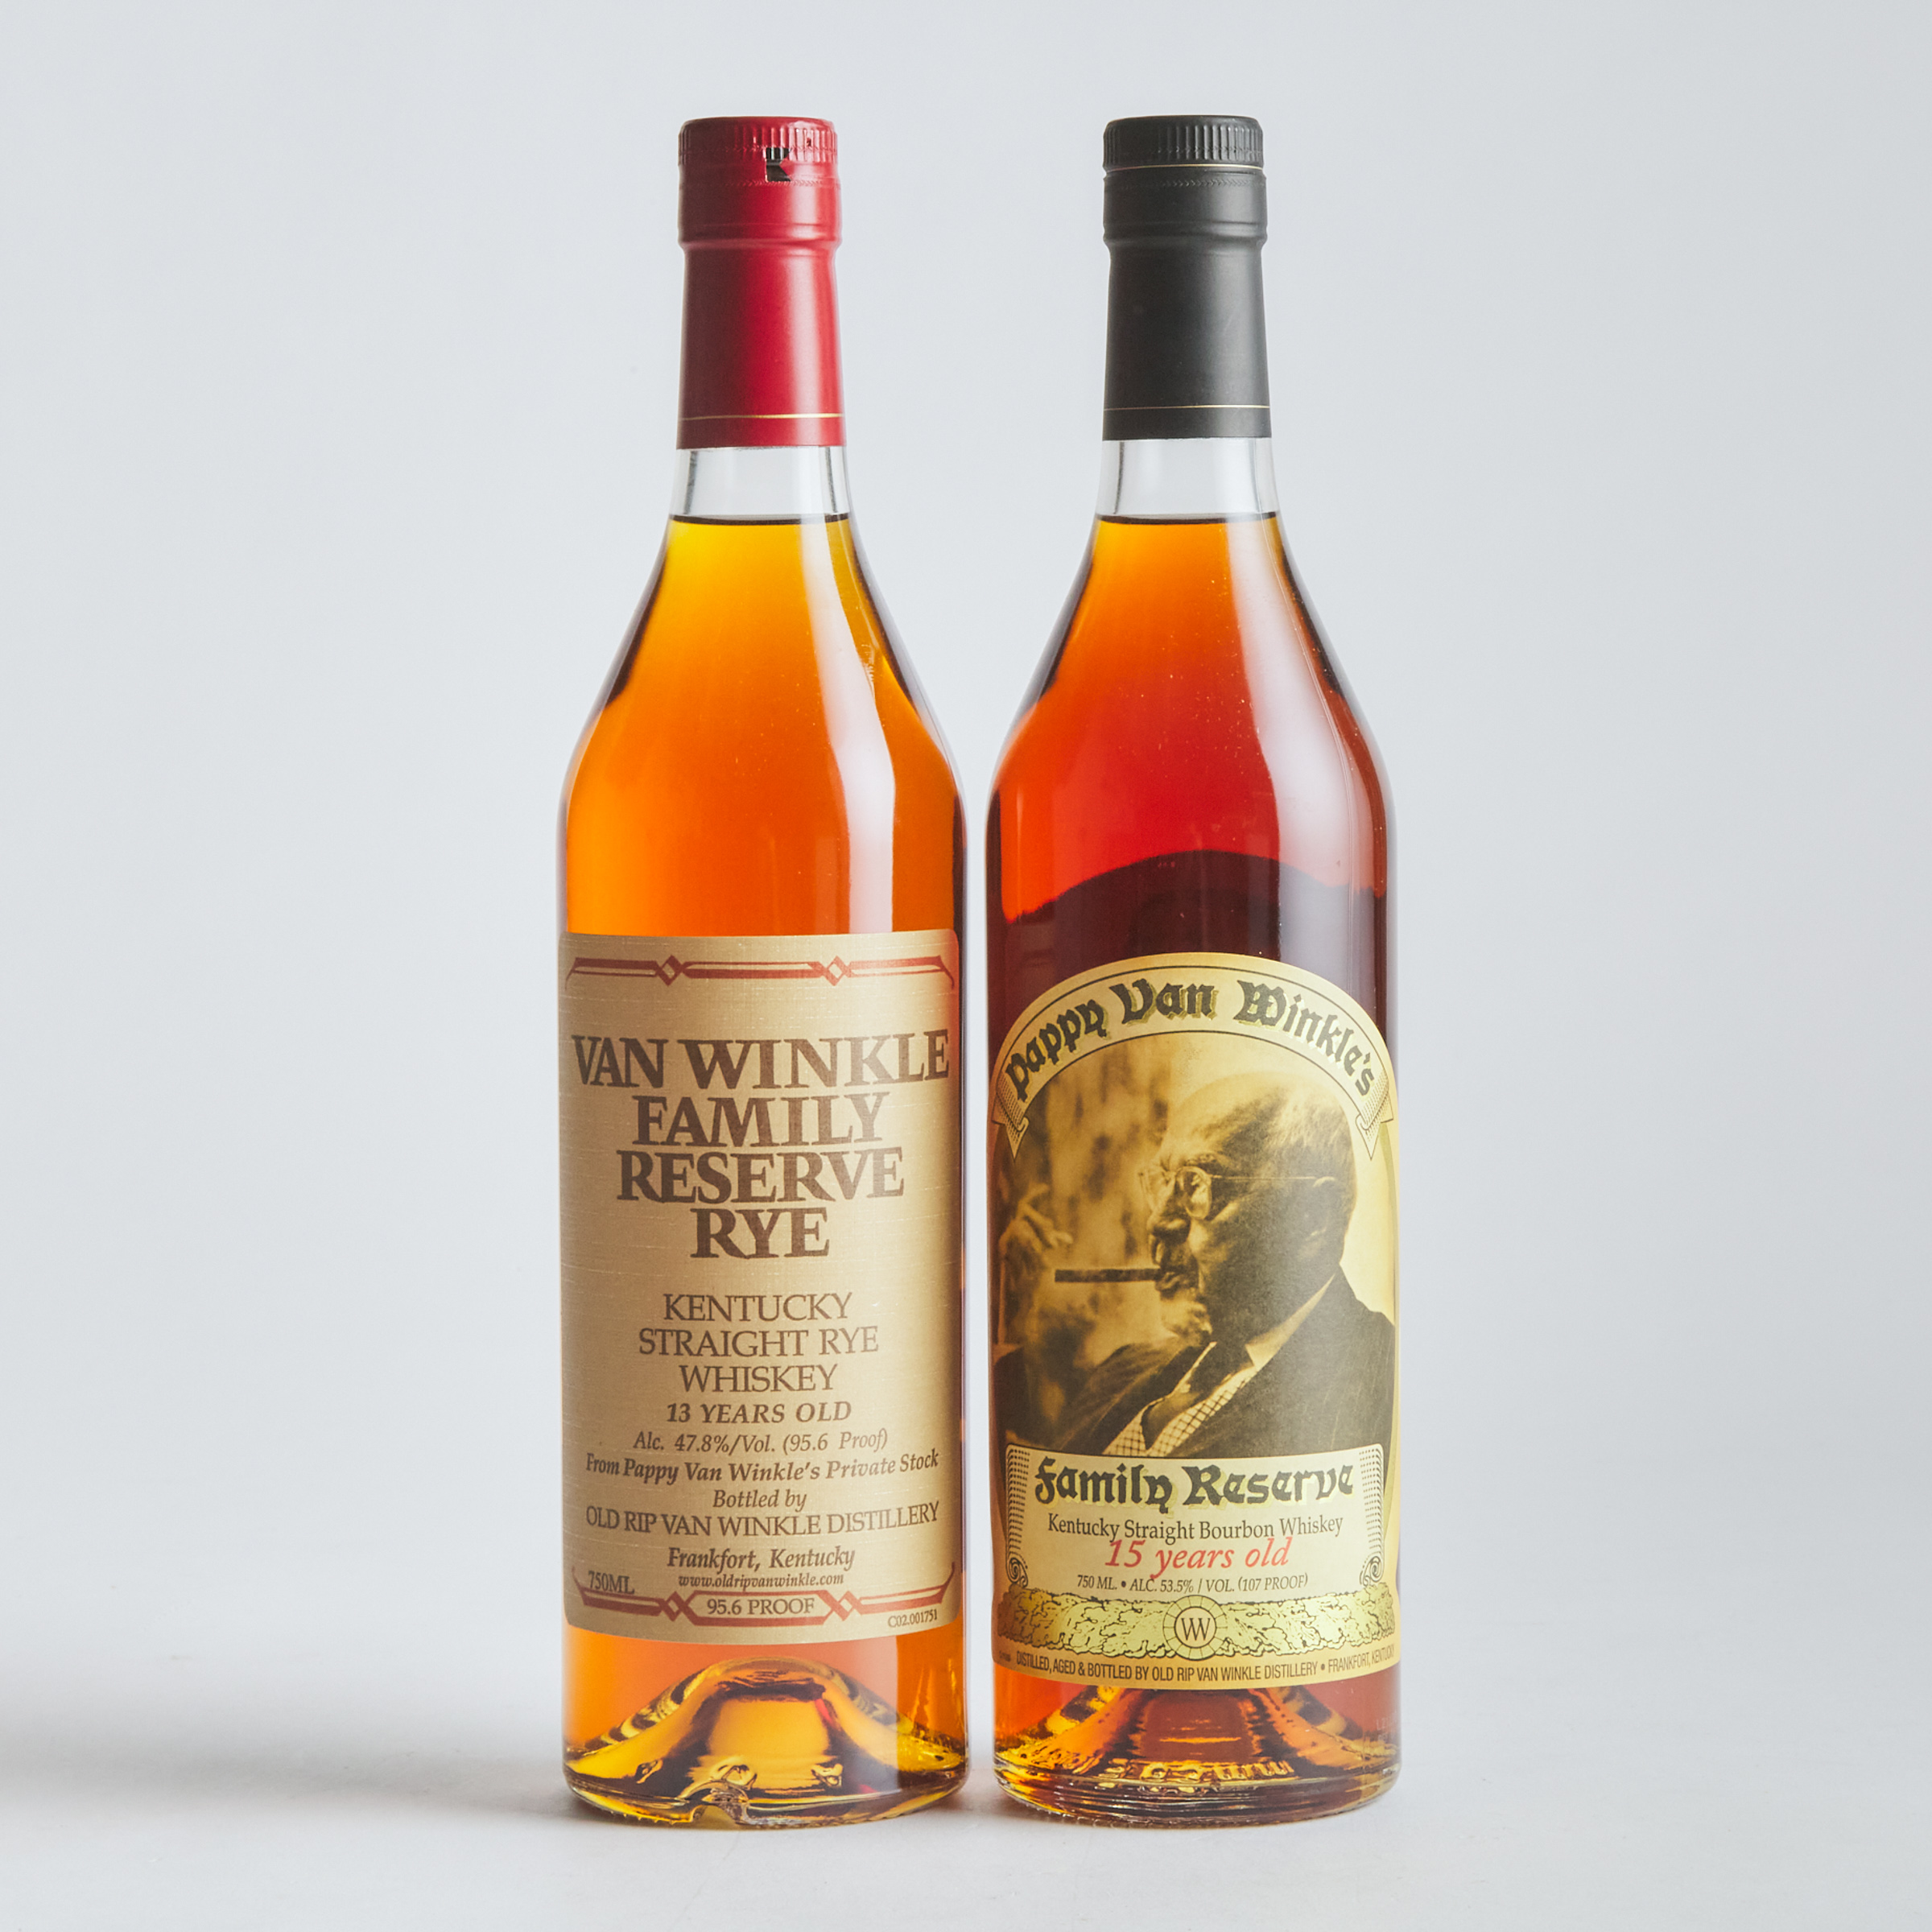 PAPPY VAN WINKLE FAMILY RESERVE KENTUCKY STRAIGHT BOURBON WHISKEY 15 YEARS (ONE 750 ML)
PAPPY VAN WINKLE FAMILY RESERVE KENTUCKY STRAIGHT RYE WHISKEY 13 YEARS (ONE 750 ML)